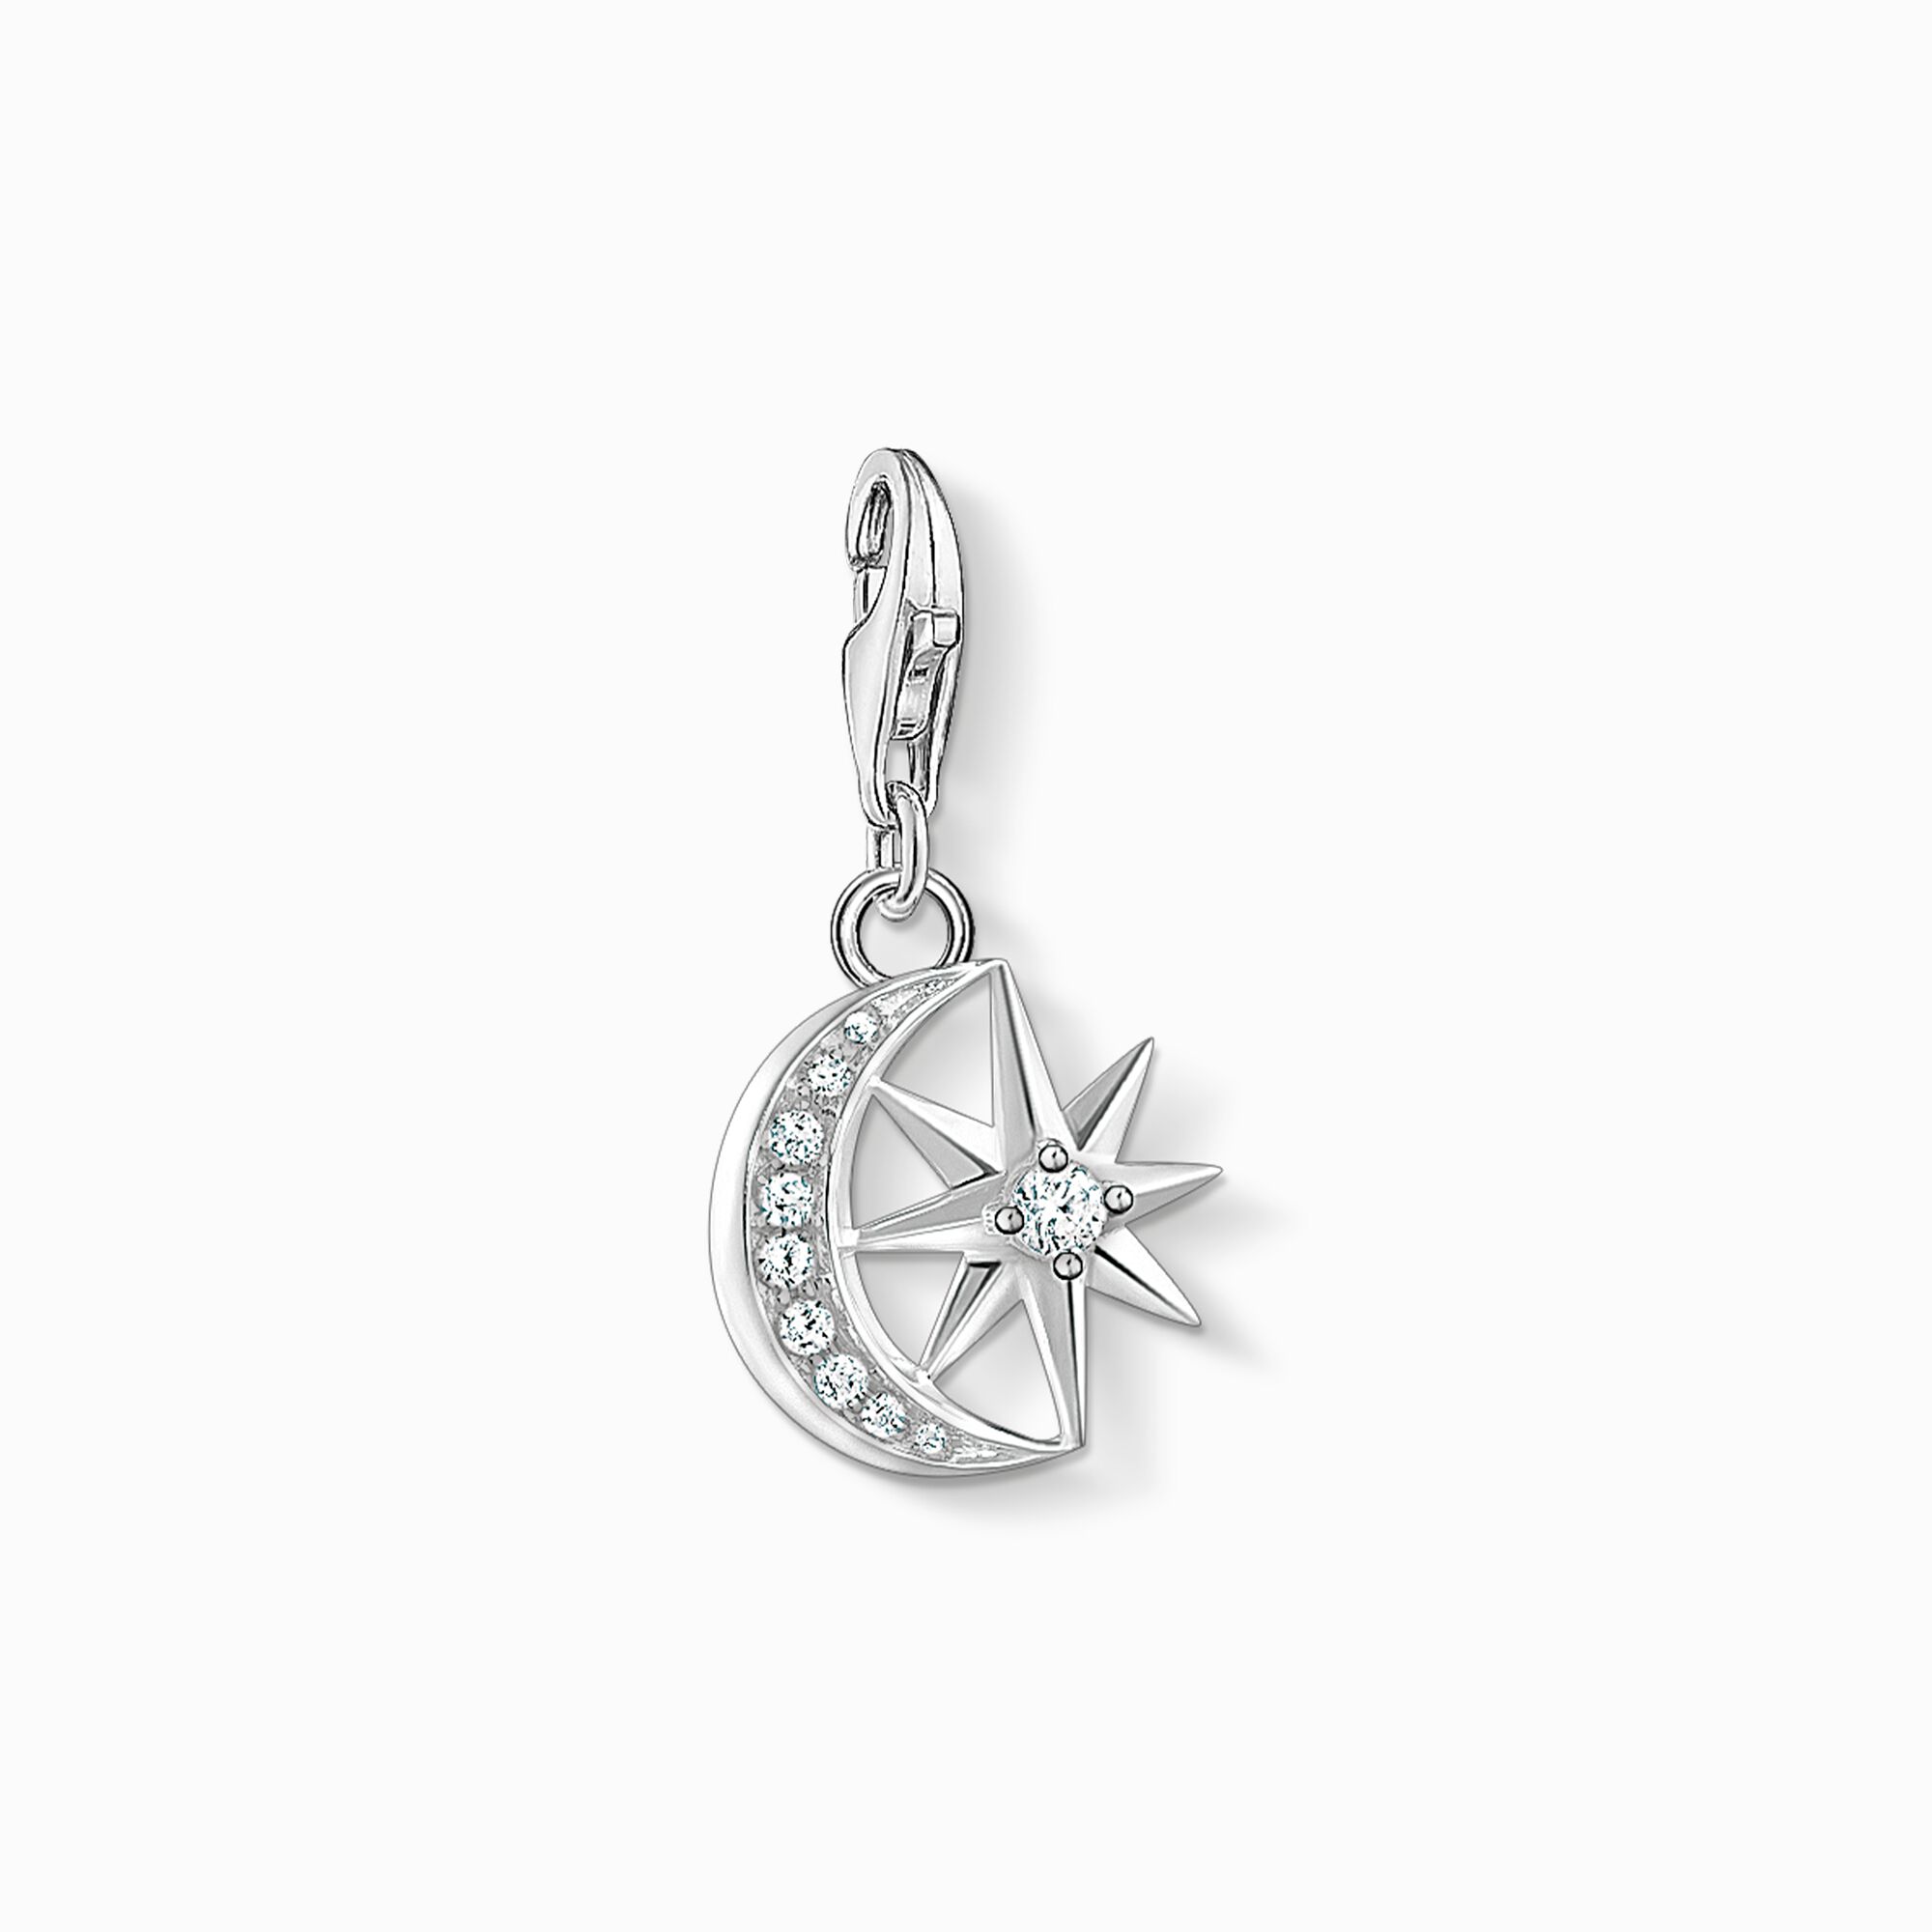 Charm pendant star and moon from the Charm Club collection in the THOMAS SABO online store